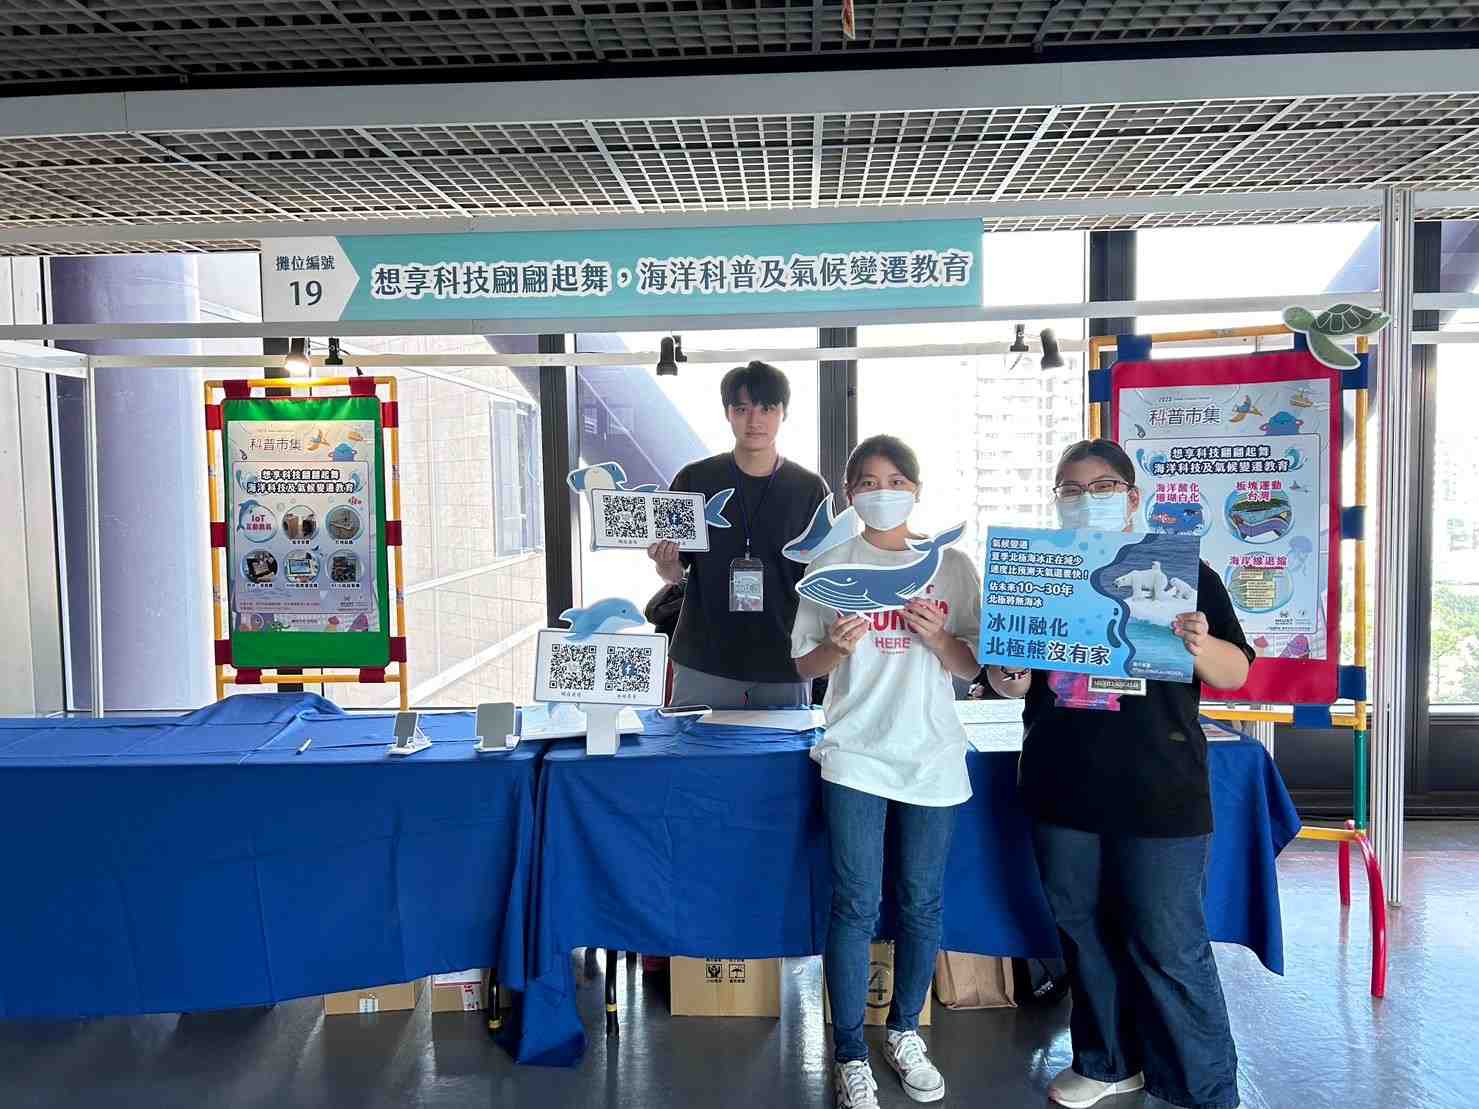 "2022 Taiwan Science Festival" Science Popularization Fair Event. Promotional Graphics or Posters